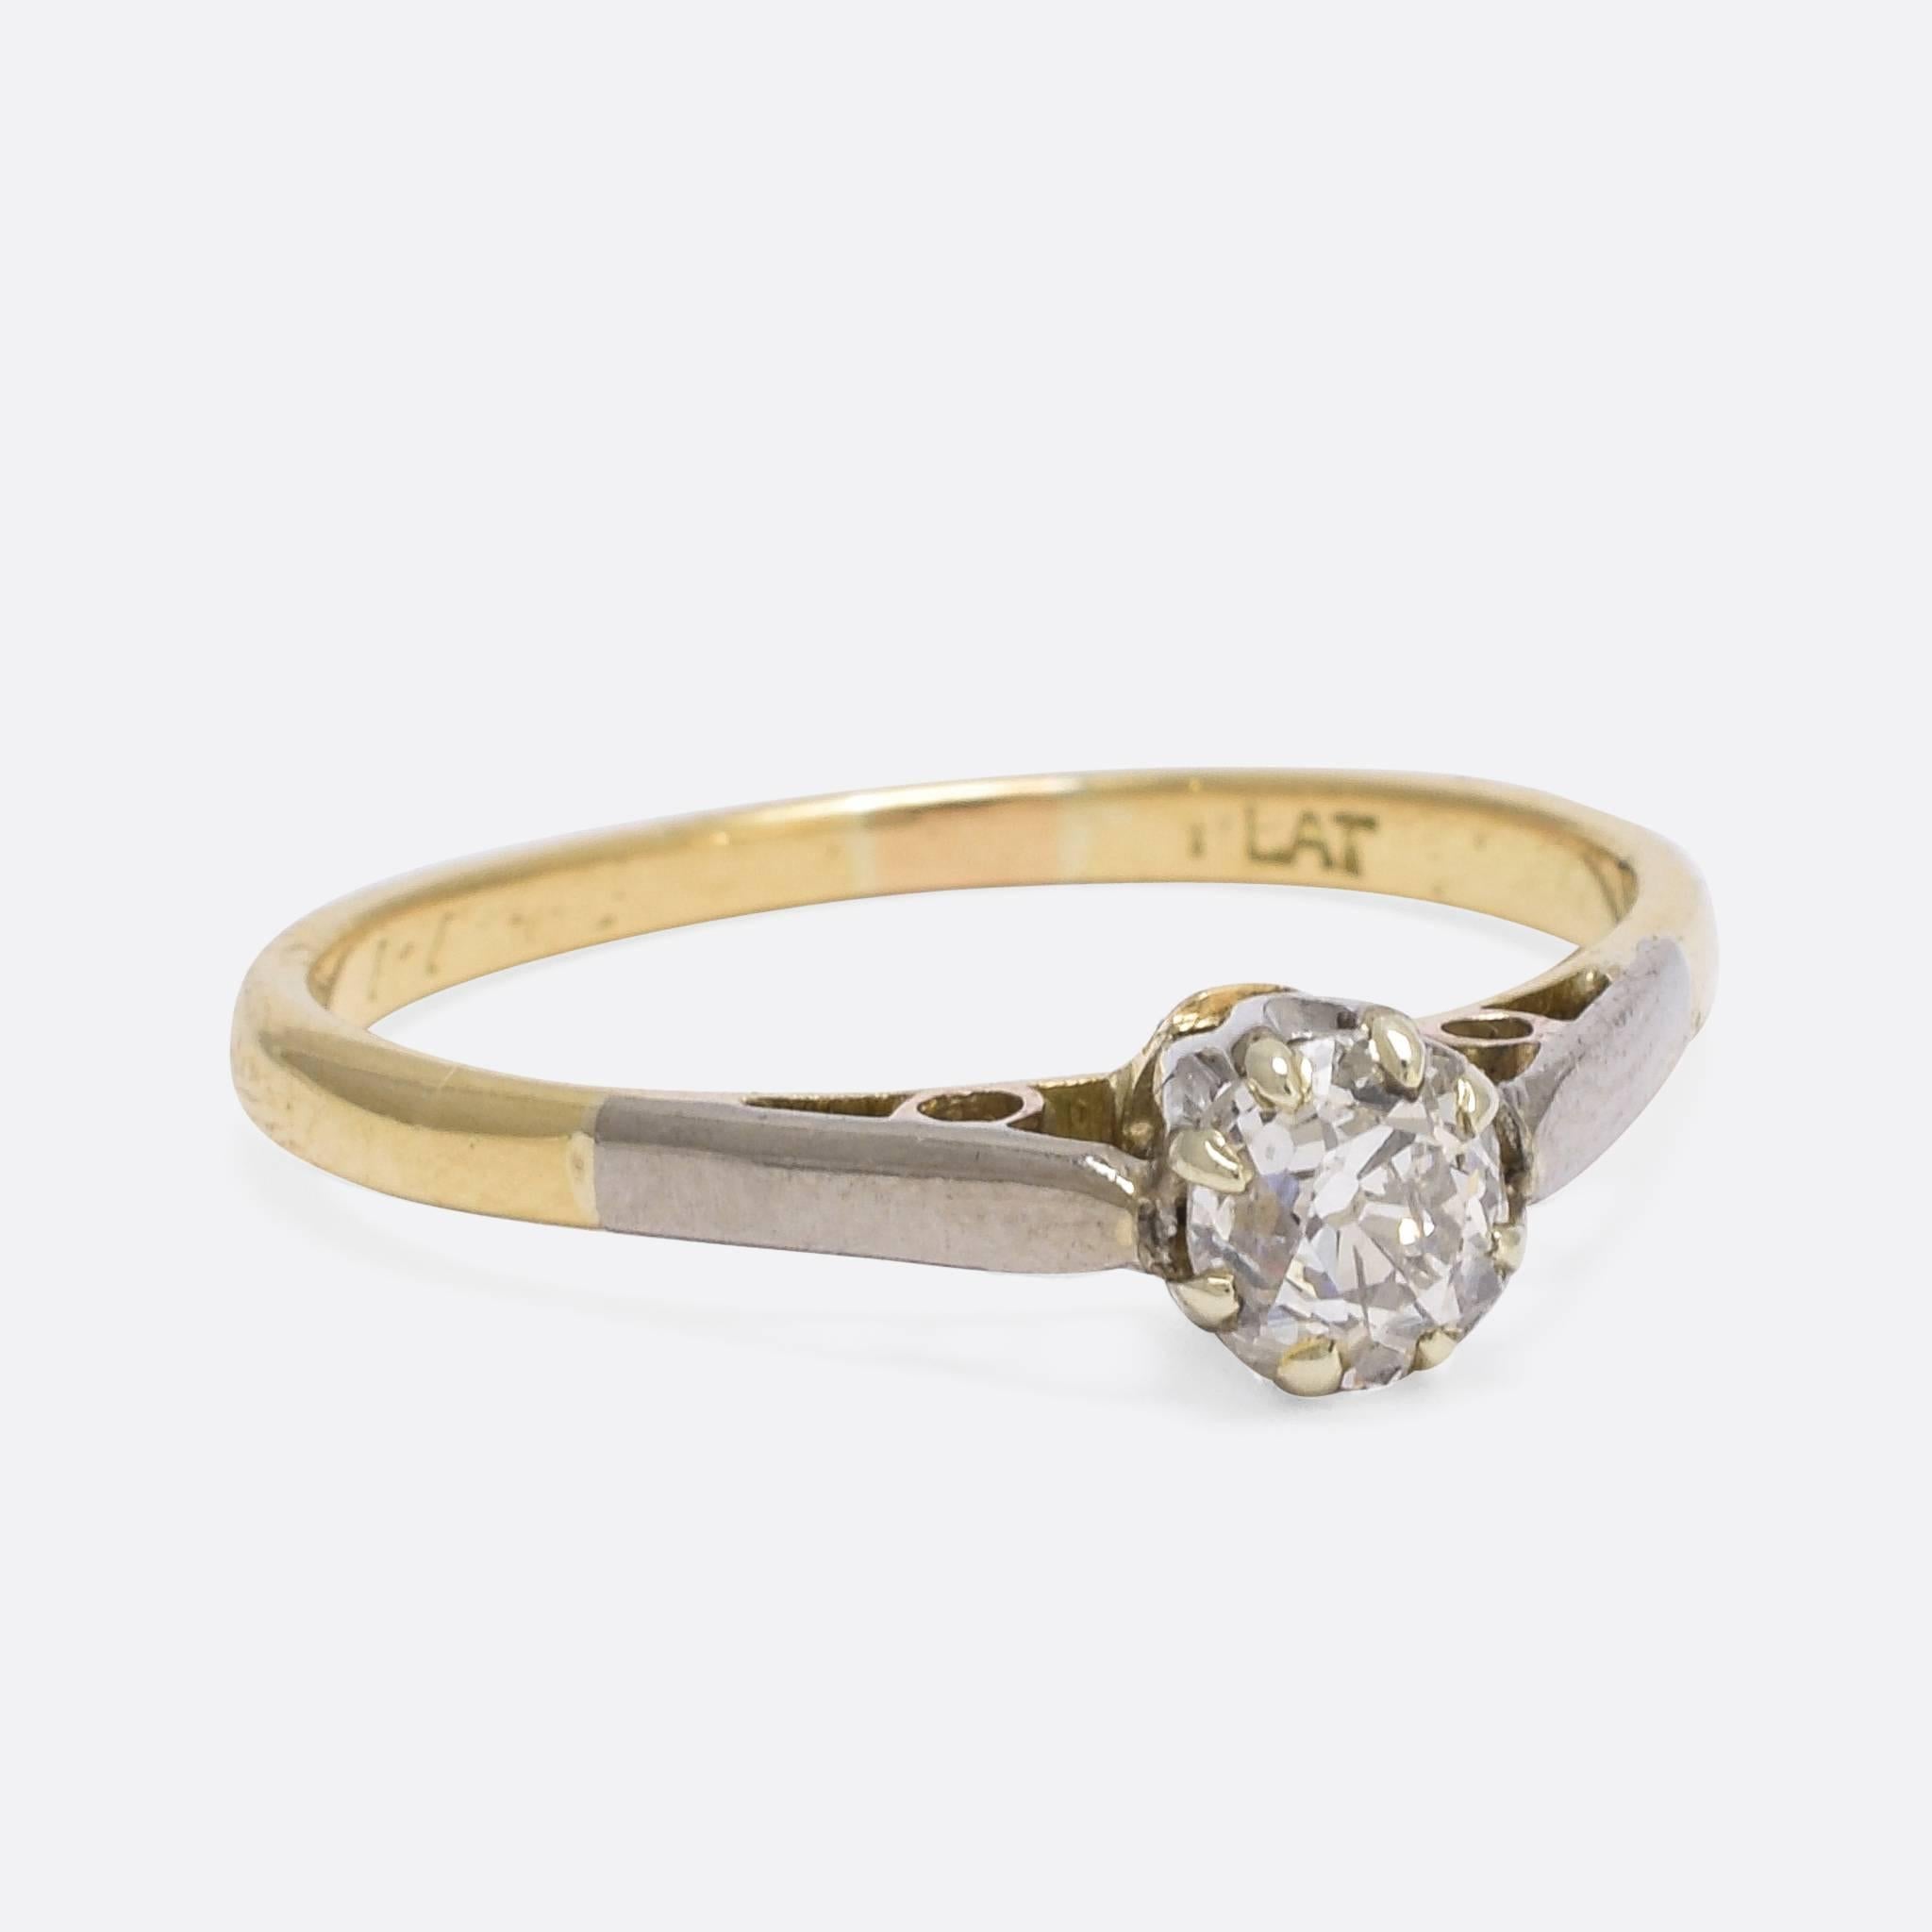 This stylish antique solitaire engagement ring is set with a beautiful .48ct cushion cut diamond. The classic 8-claw mount is modelled in 18ct gold, with platinum settings and a platinum finish that runs down the shoulders to create a lovely